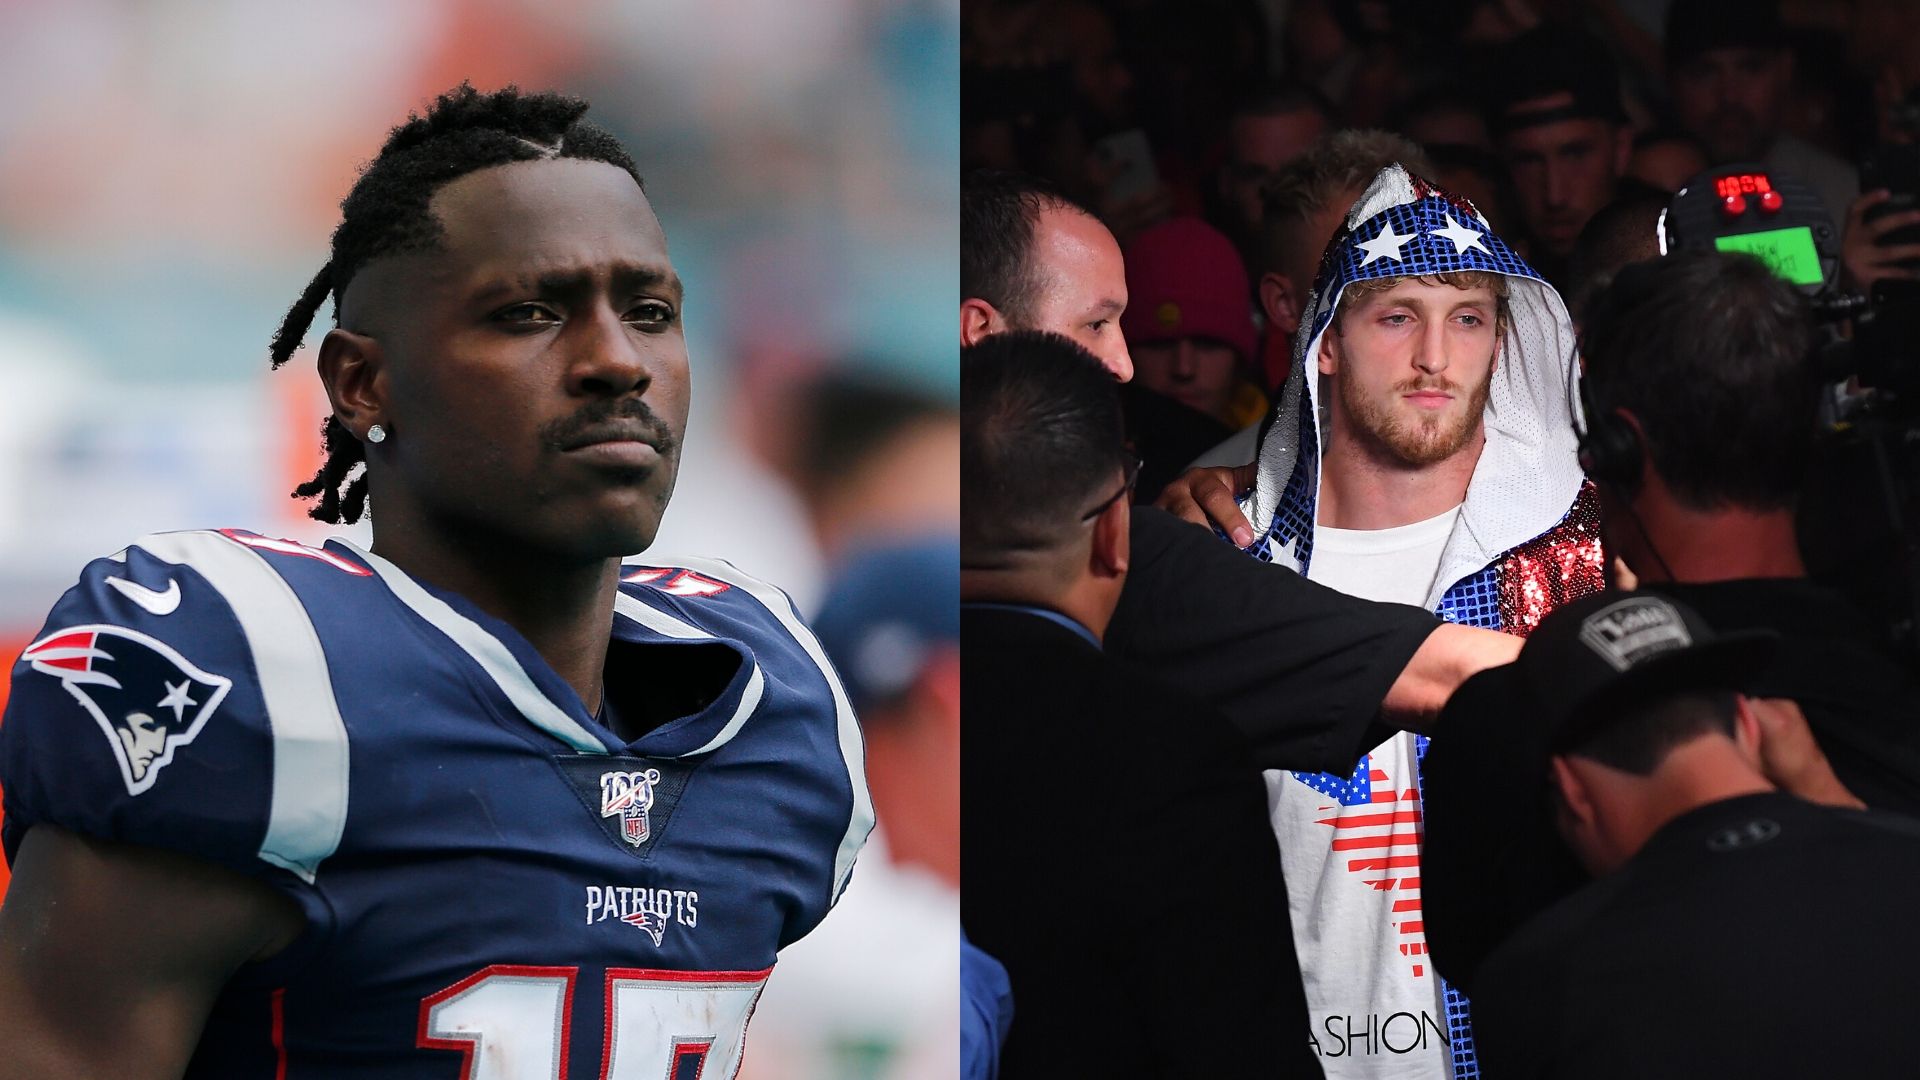 Antonio Brown was expected to face Logan Paul in their next fight